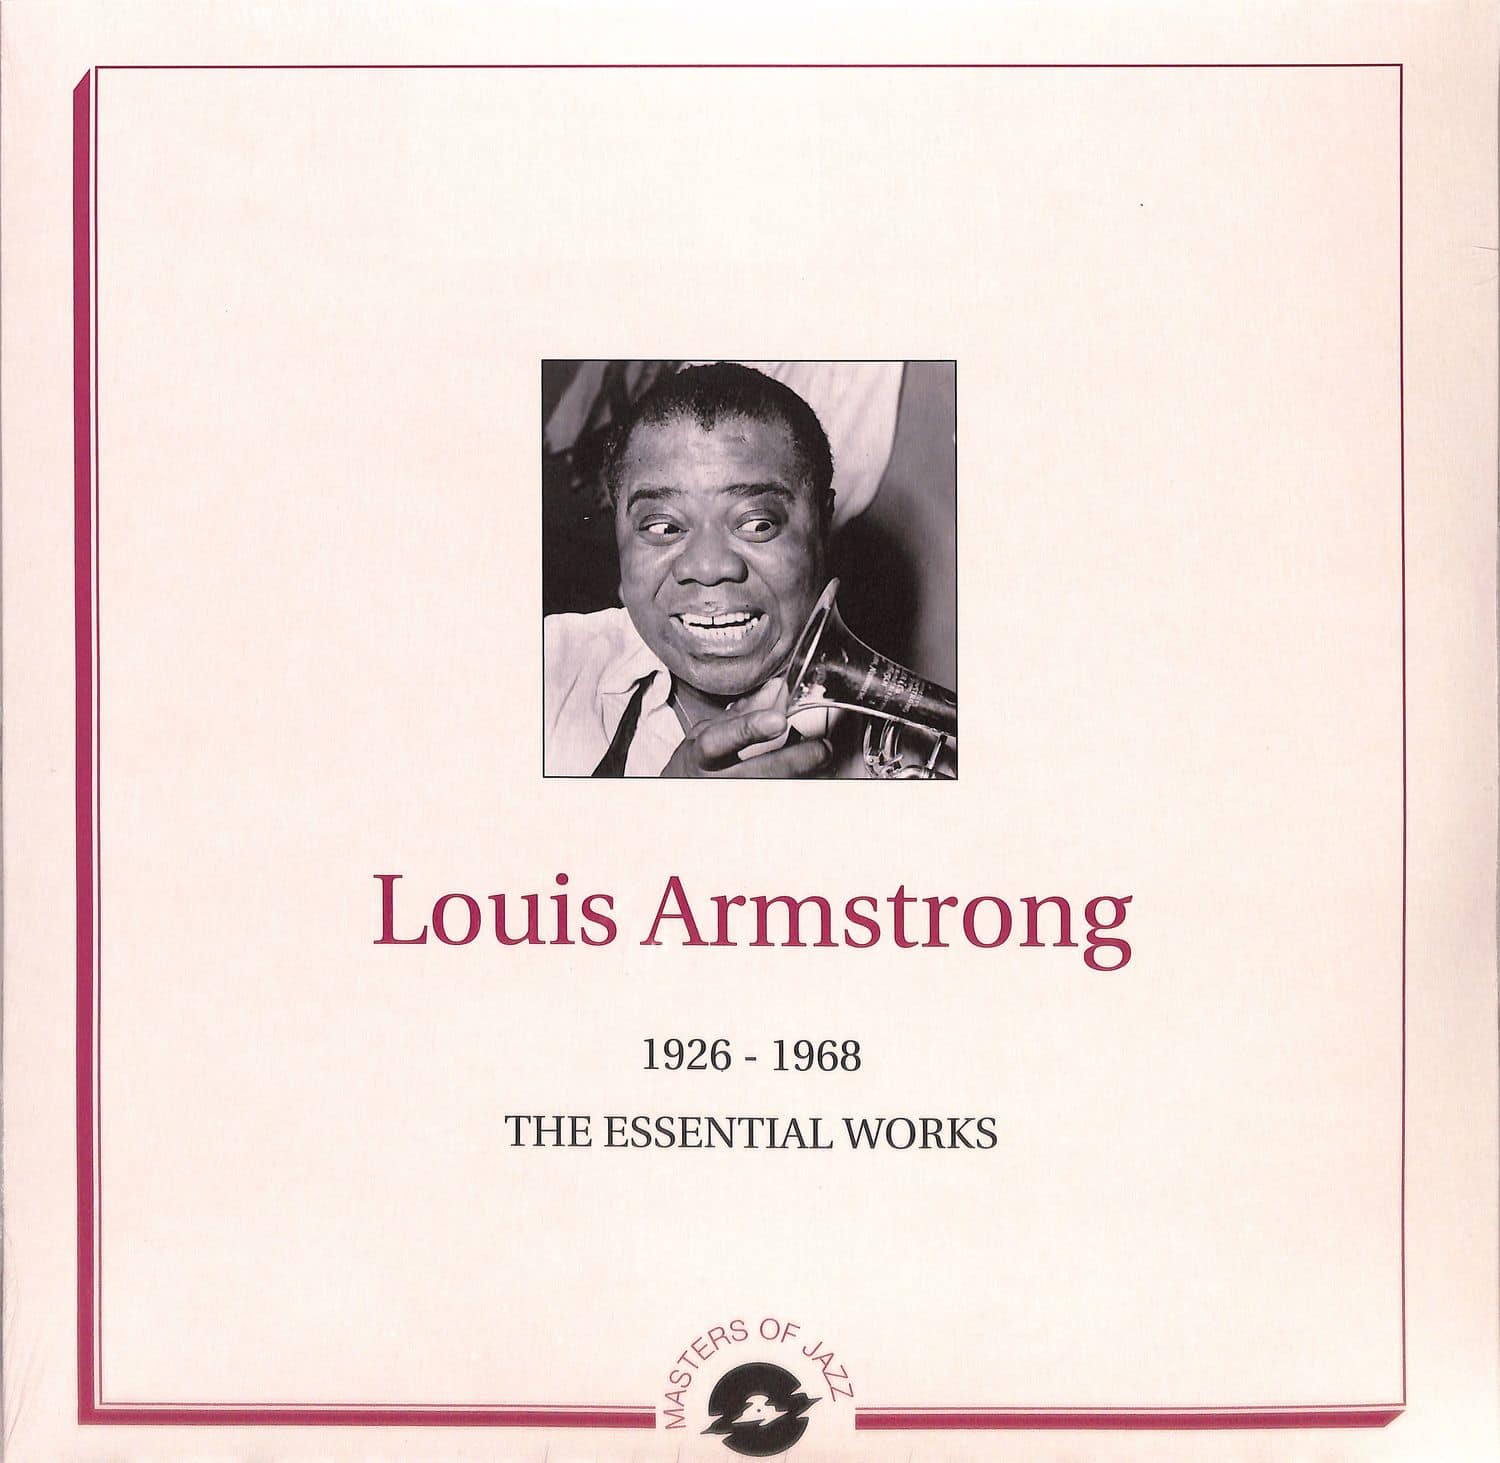 Louis Armstrong - THE ESSENTIAL WORKS 1926-1968 